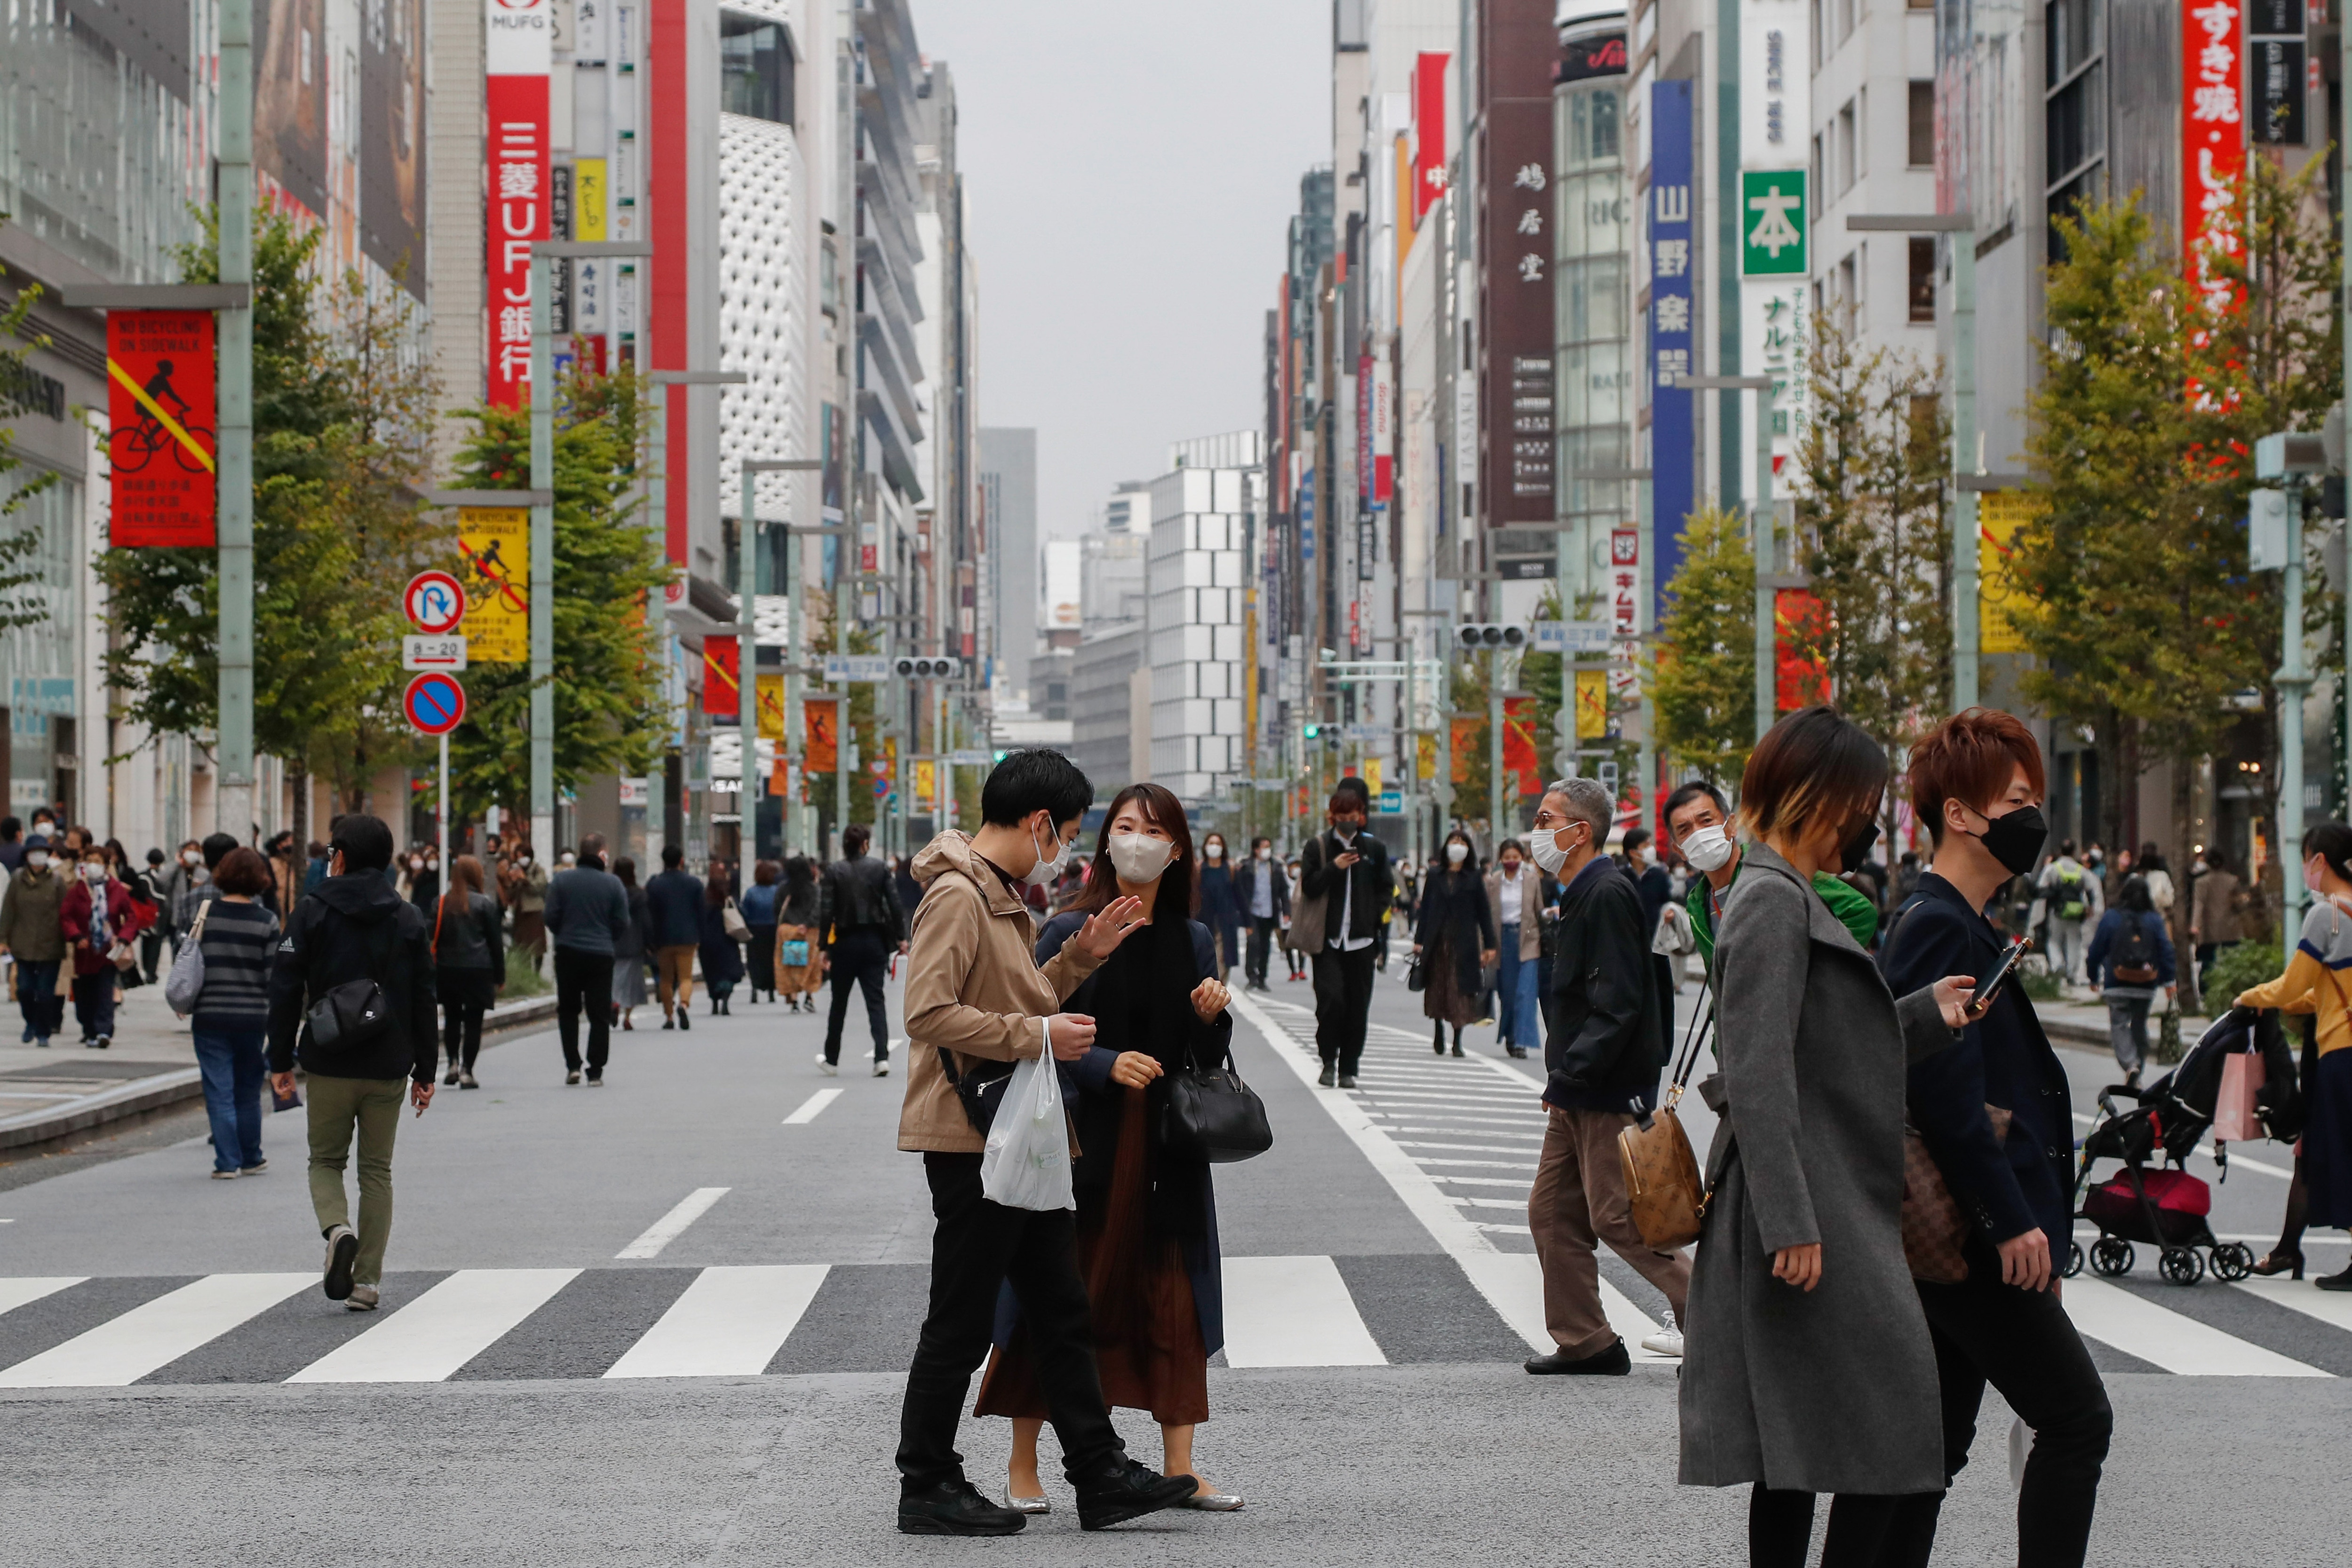 People wearing face masks as a preventive measure against the spread of coronavirus cross the street at Tokyo's Ginza fashion district.